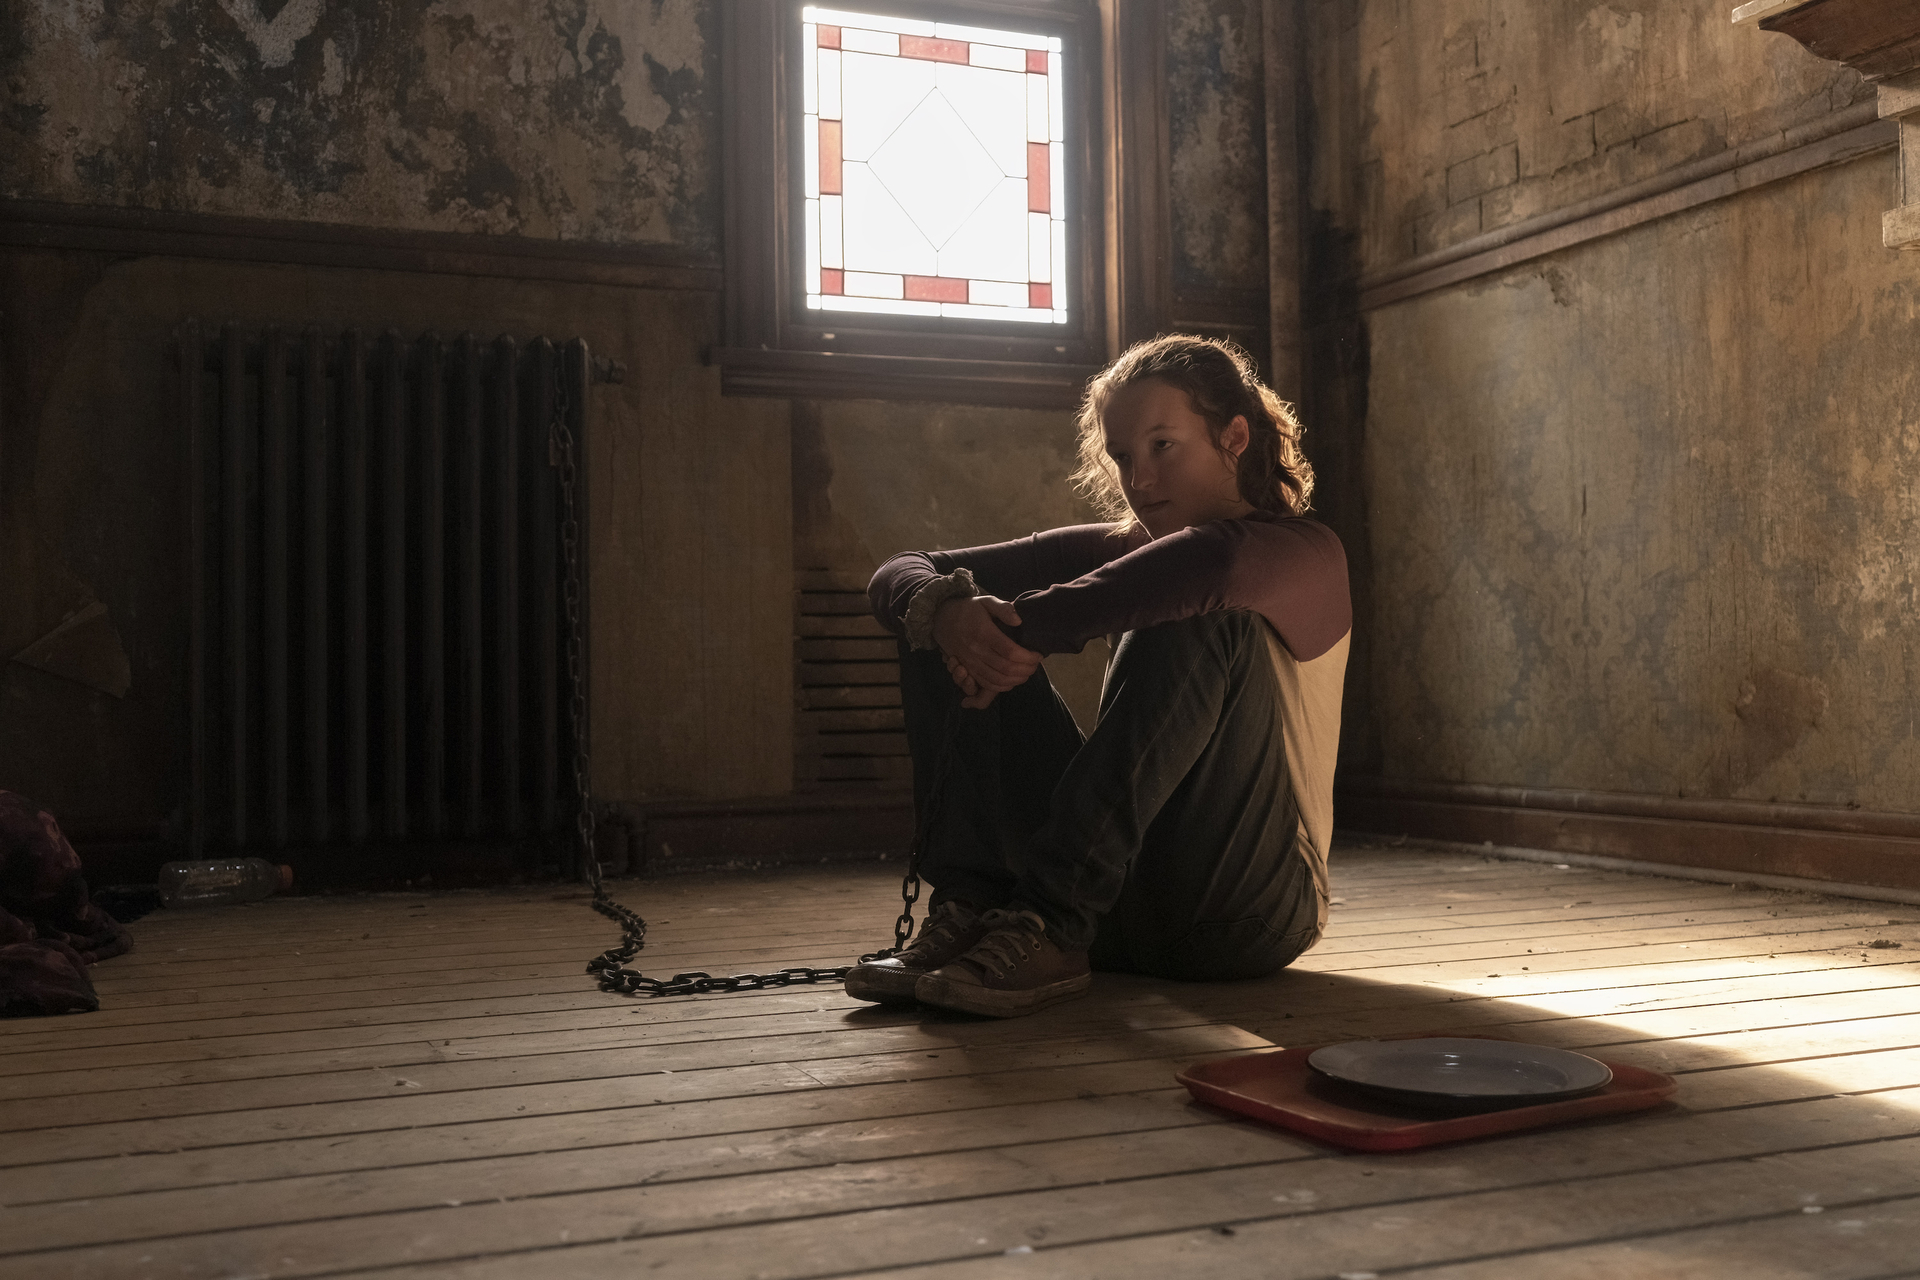 HBO's The Last Of Us fans can finally check out extended version of episode  3 now